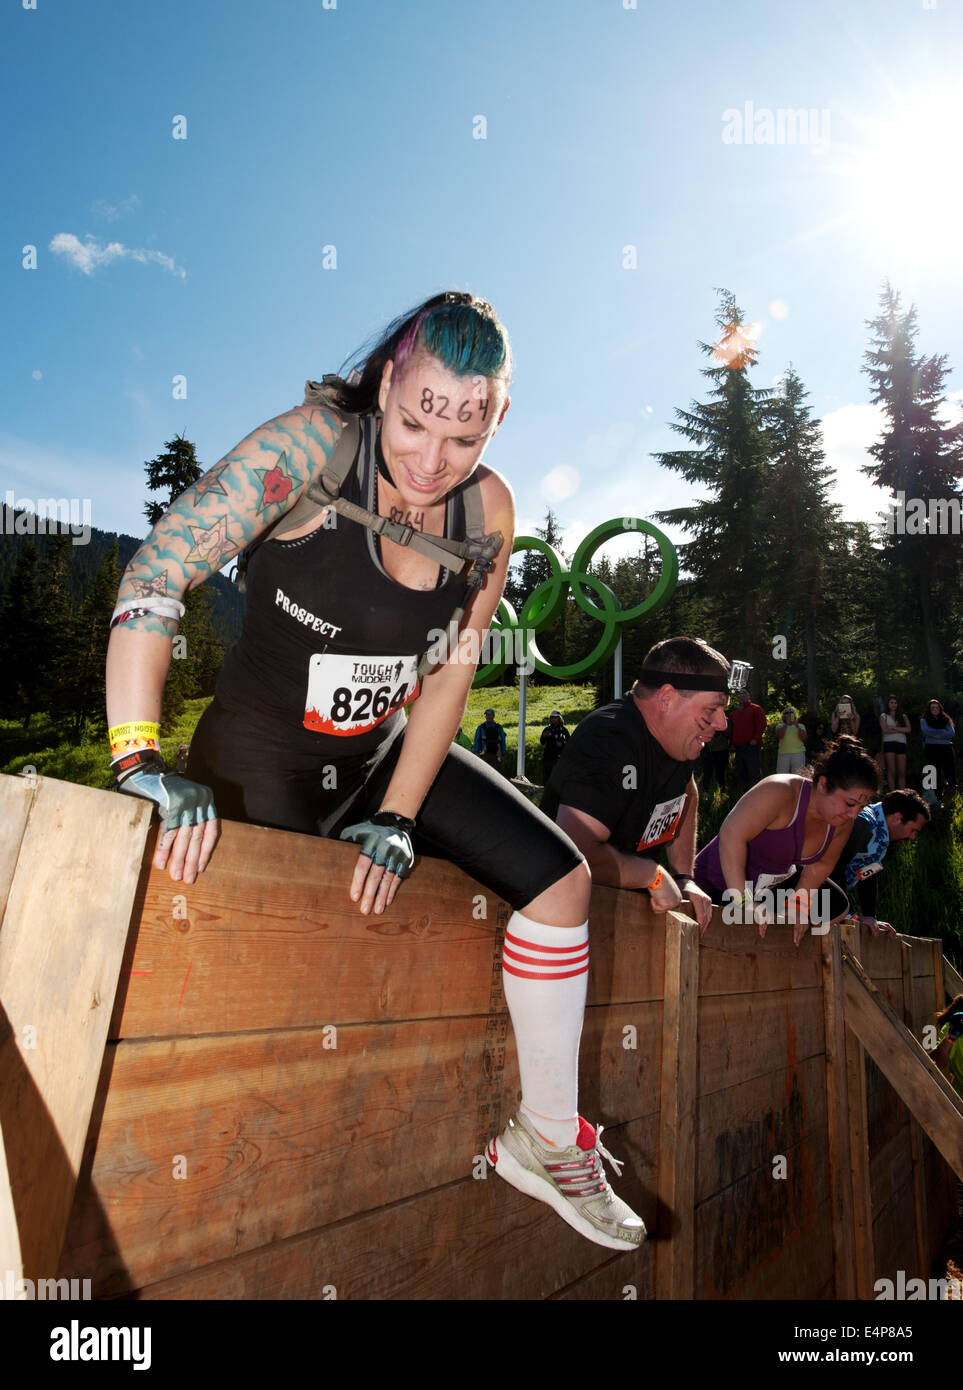 A woman climbs a wall at the Whistler Vancouver Tough Mudder event. Stock Photo